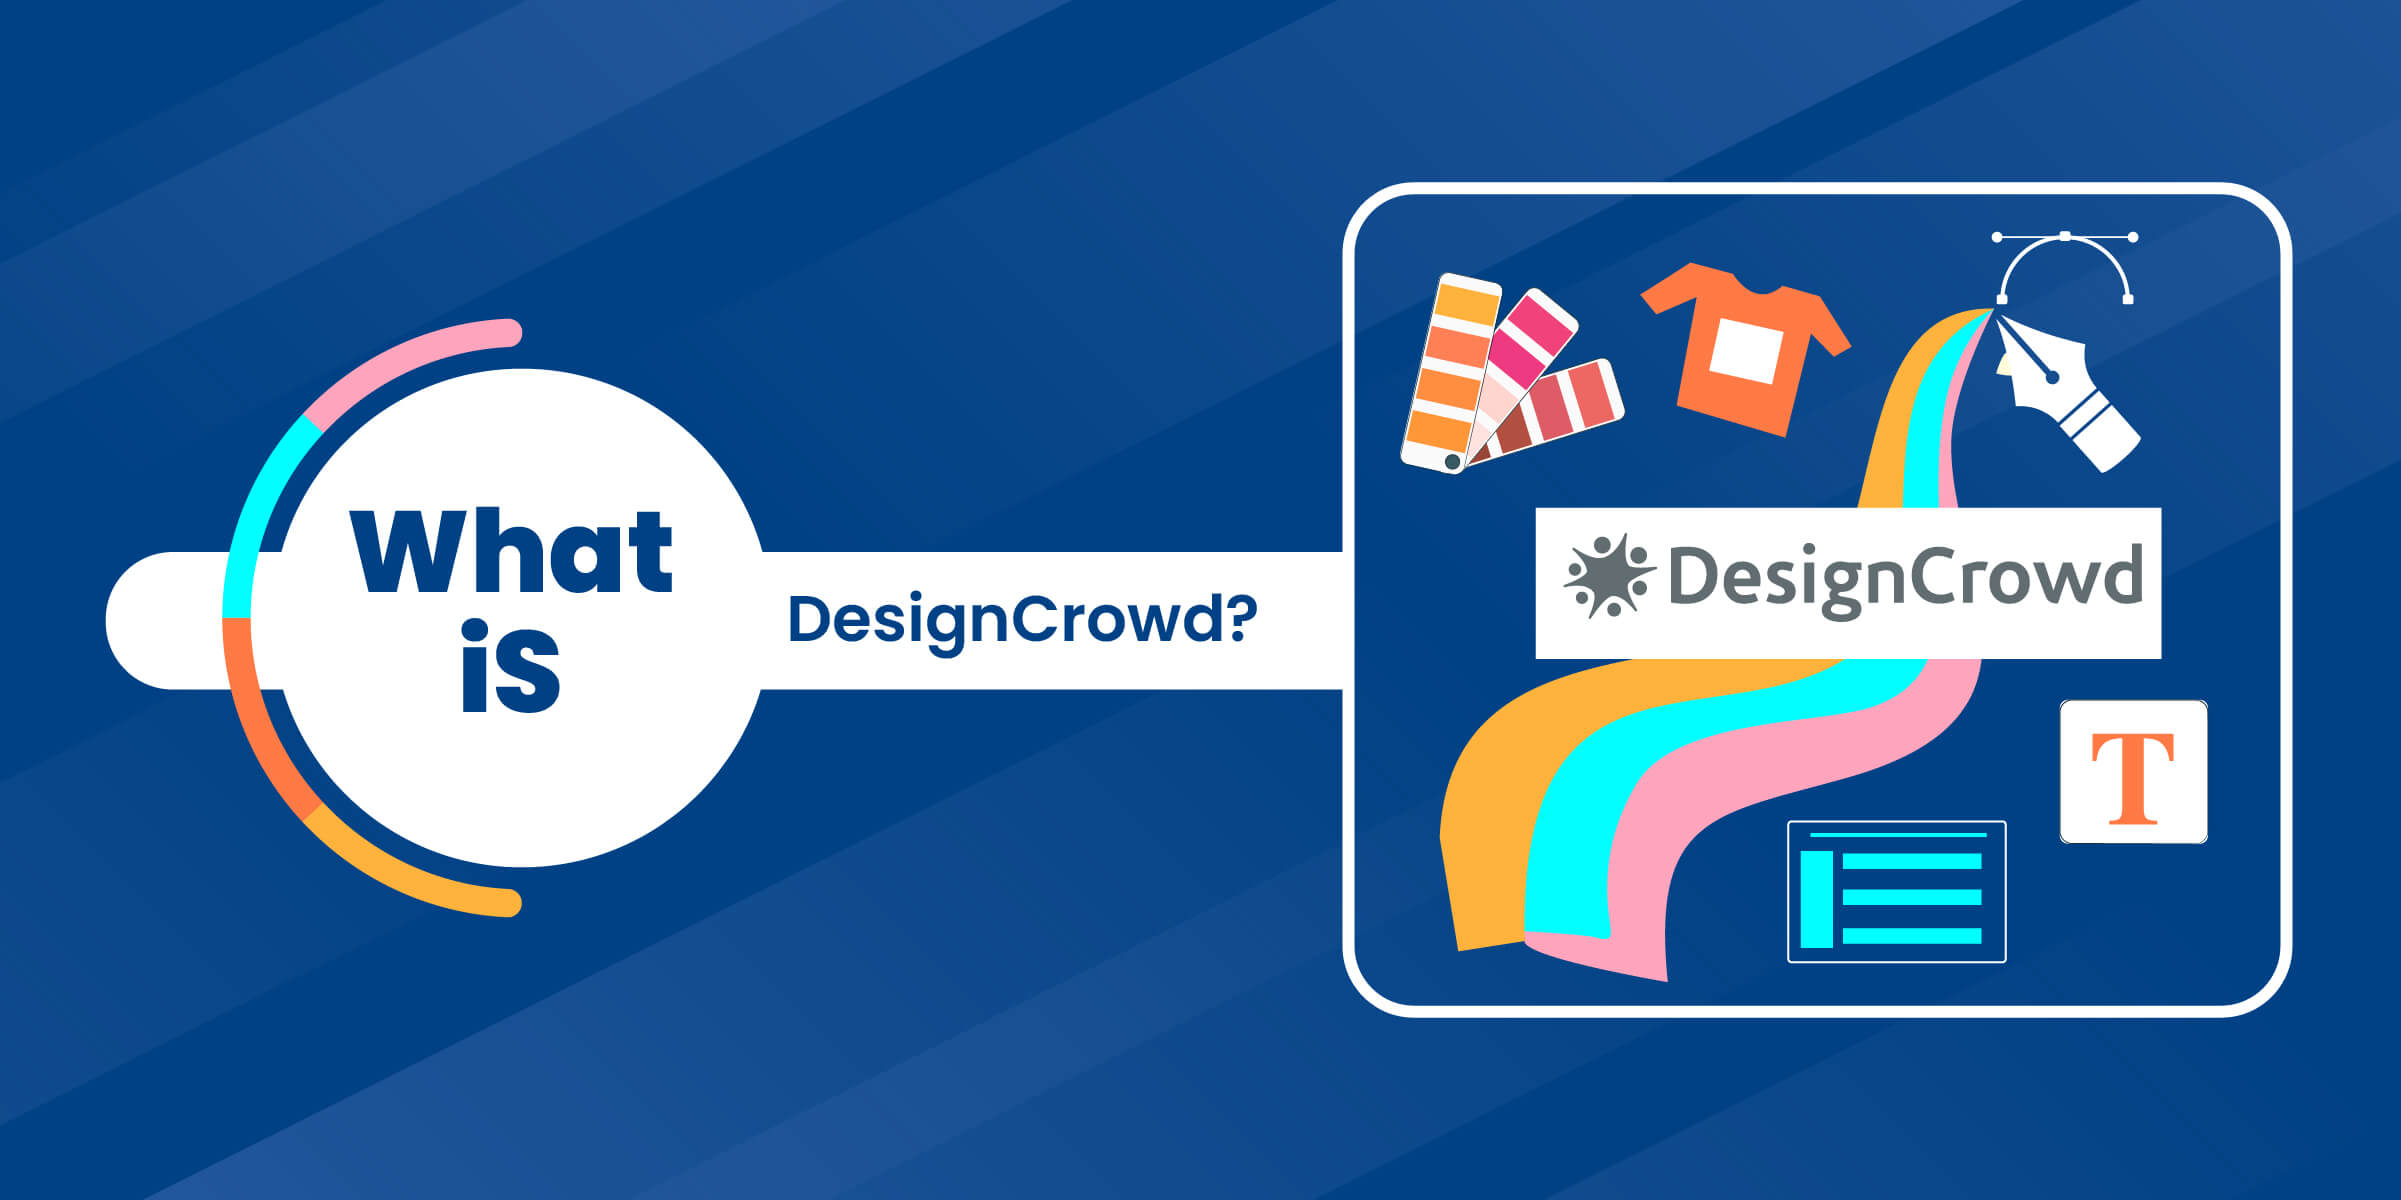 What Is DesignCrowd